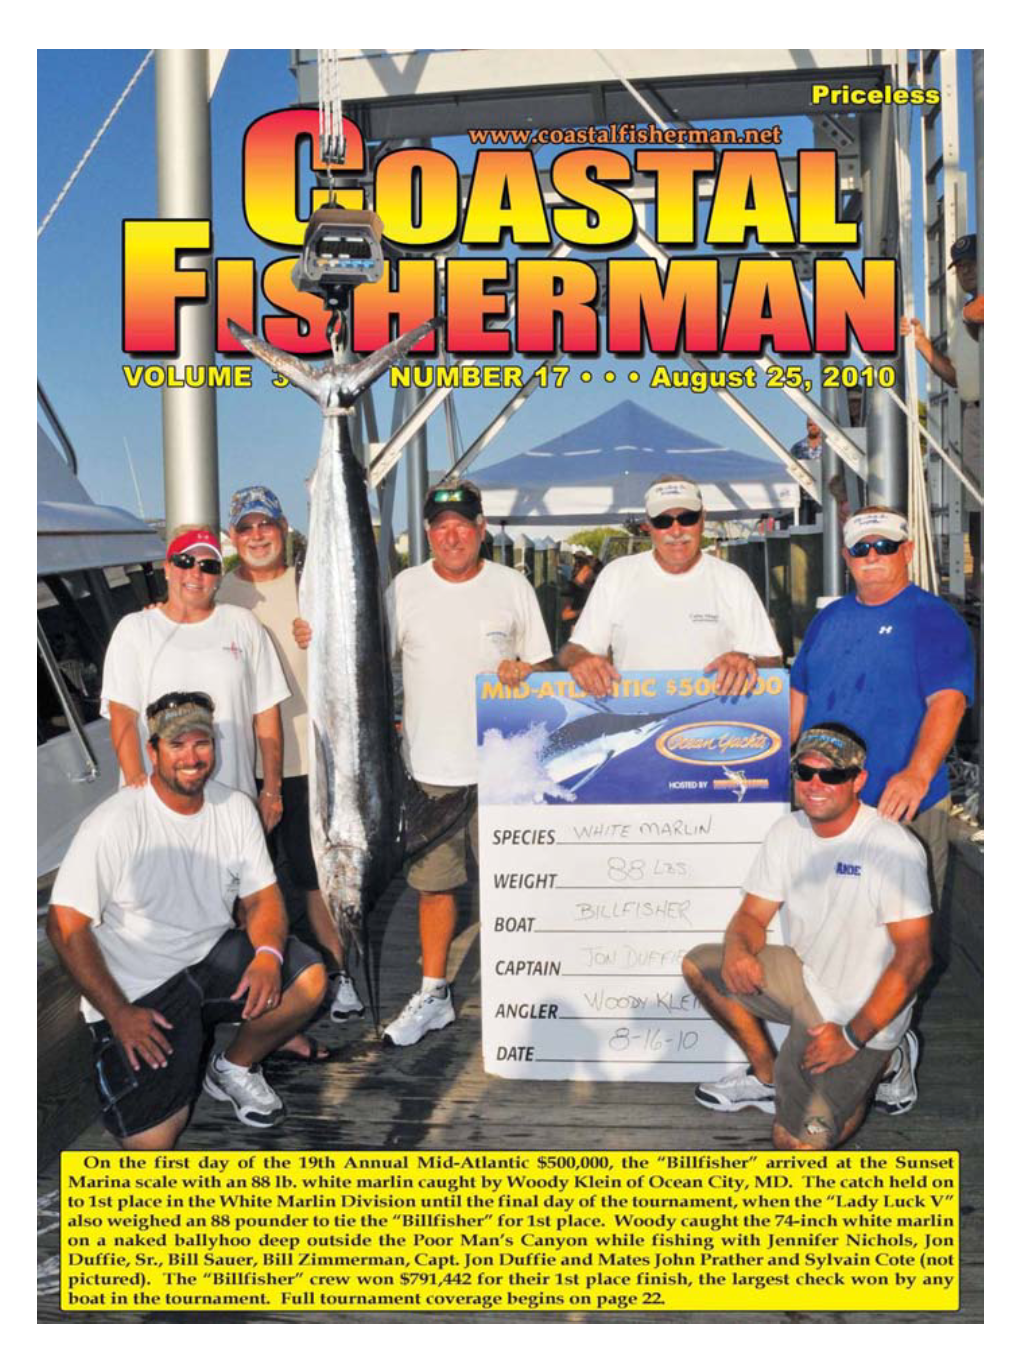 Heaviest Fish of the Year (As Reported to the Coastal Fisherman - Ties Go to First Fish Reported) Species Ocean City Delaware Species Ocean City Delaware